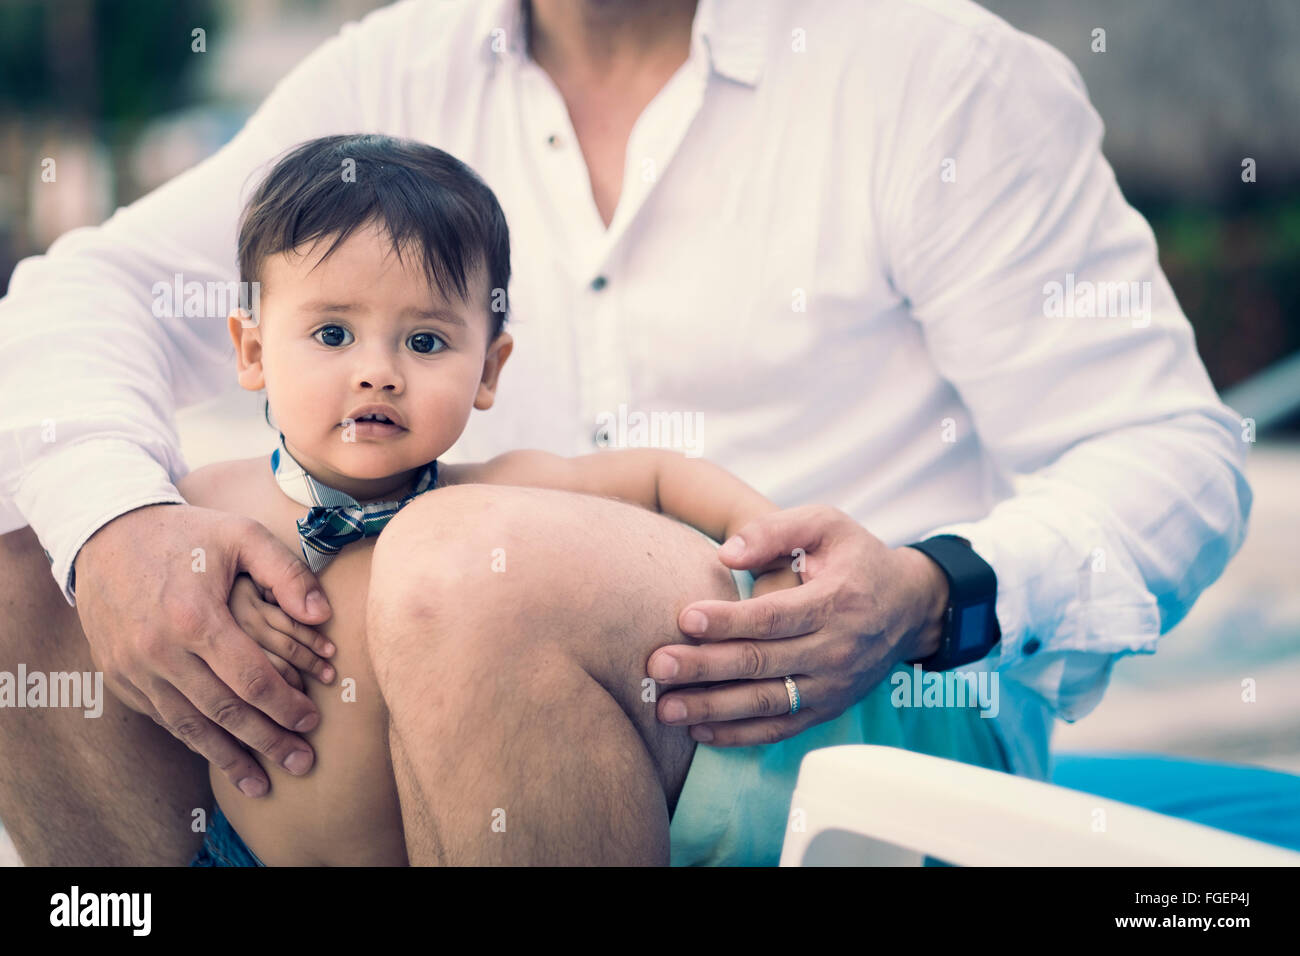 Male hispanic child, 1 year of age, held by his father between his legs Stock Photo